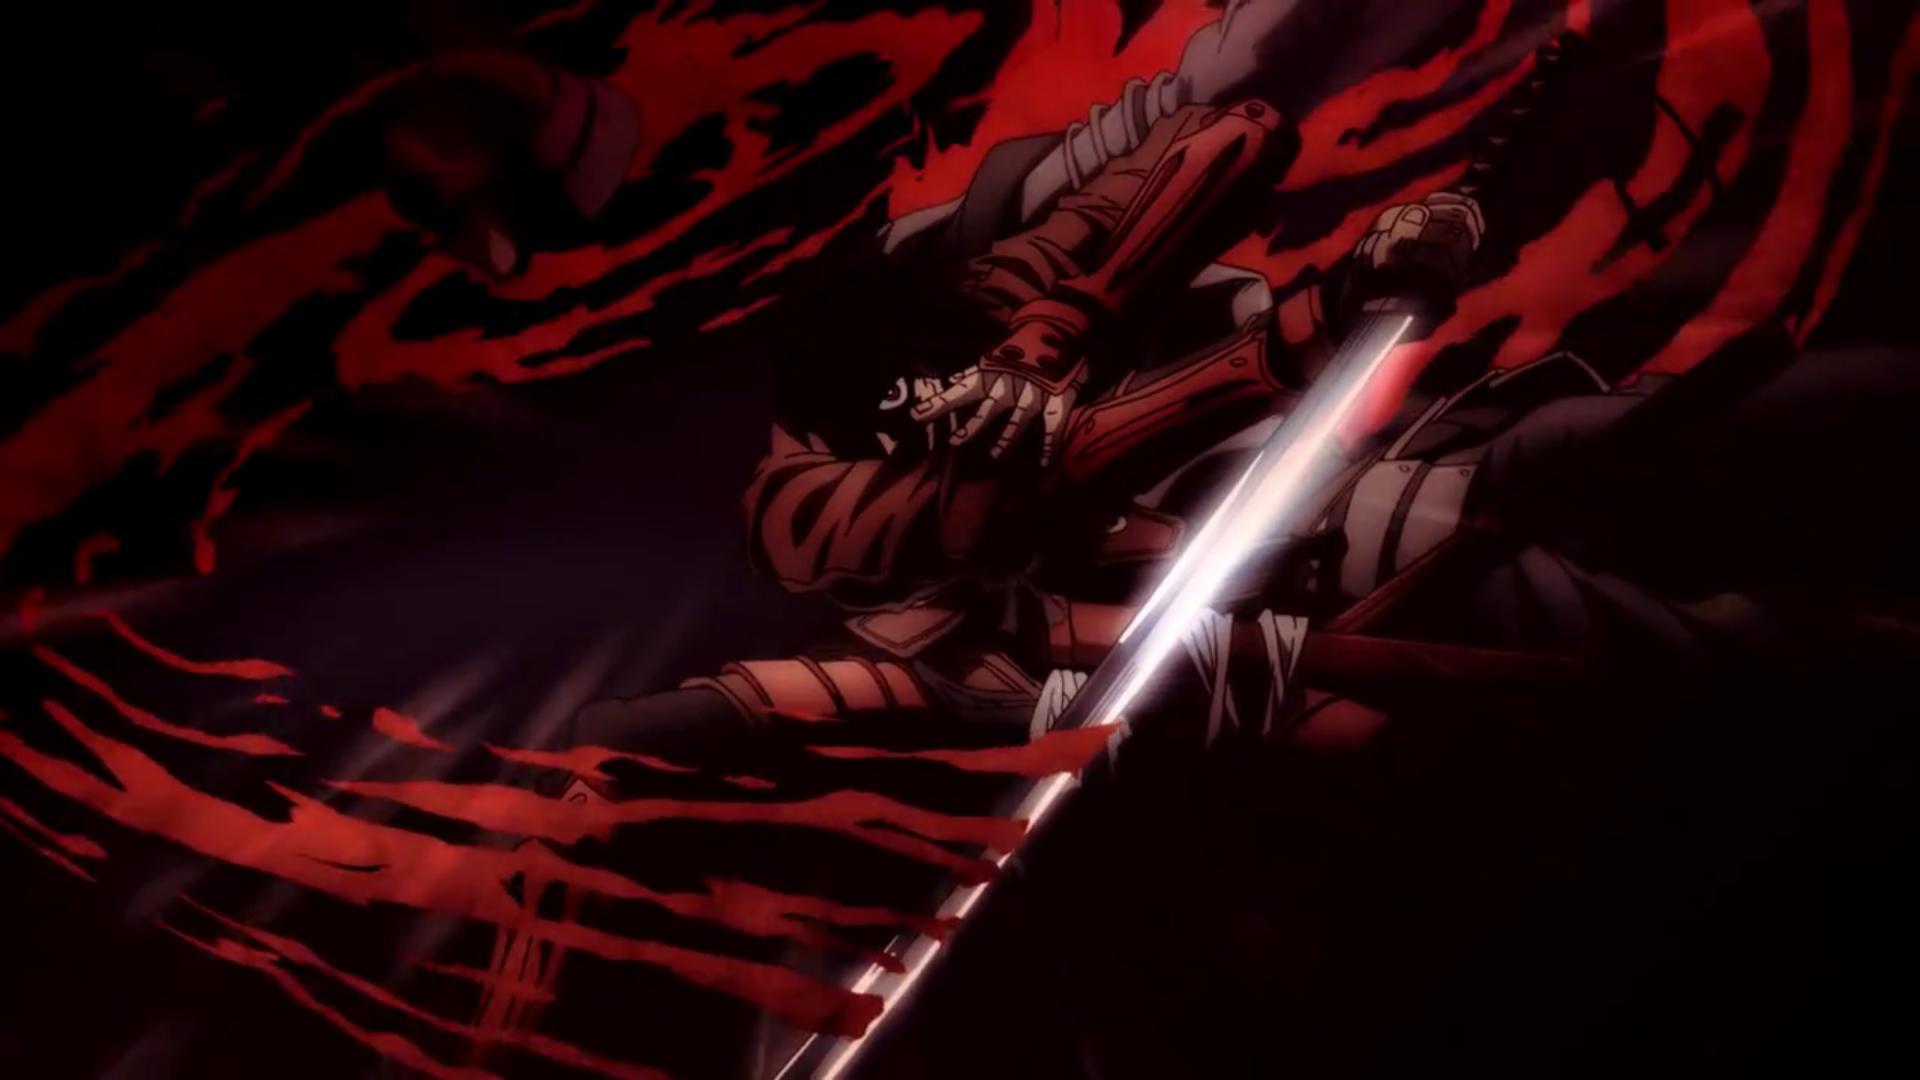 Drifters Anime Characters group wallpaper, 1920x1080